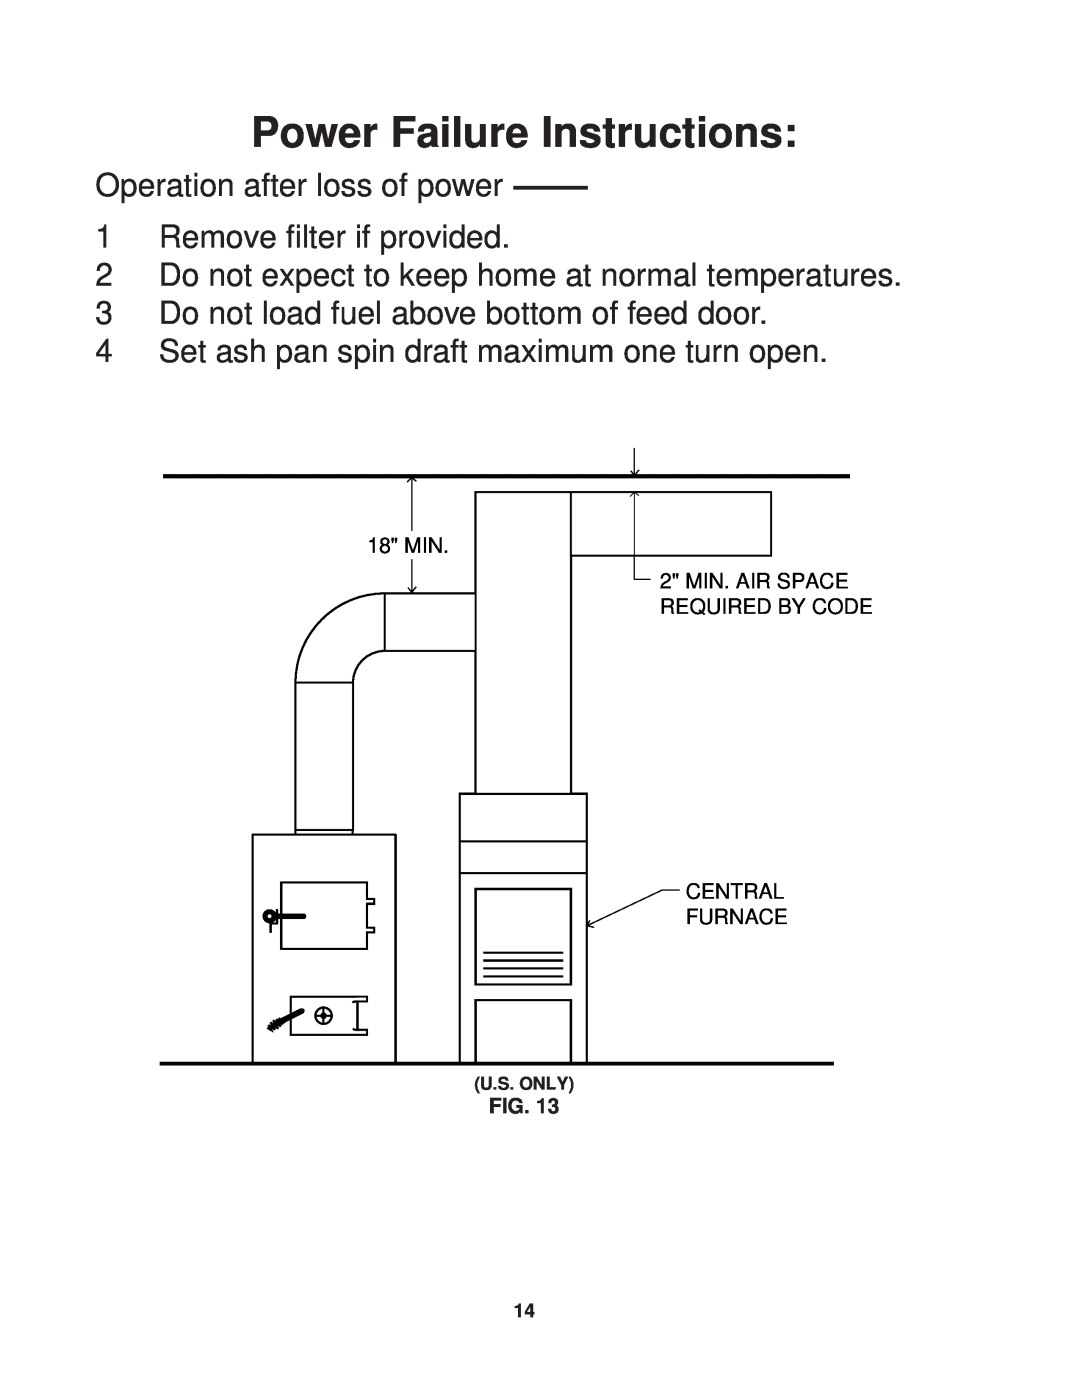 United States Stove 1537Q Power Failure Instructions, Operation after loss of power, 1Remove filter if provided, 18 MIN 